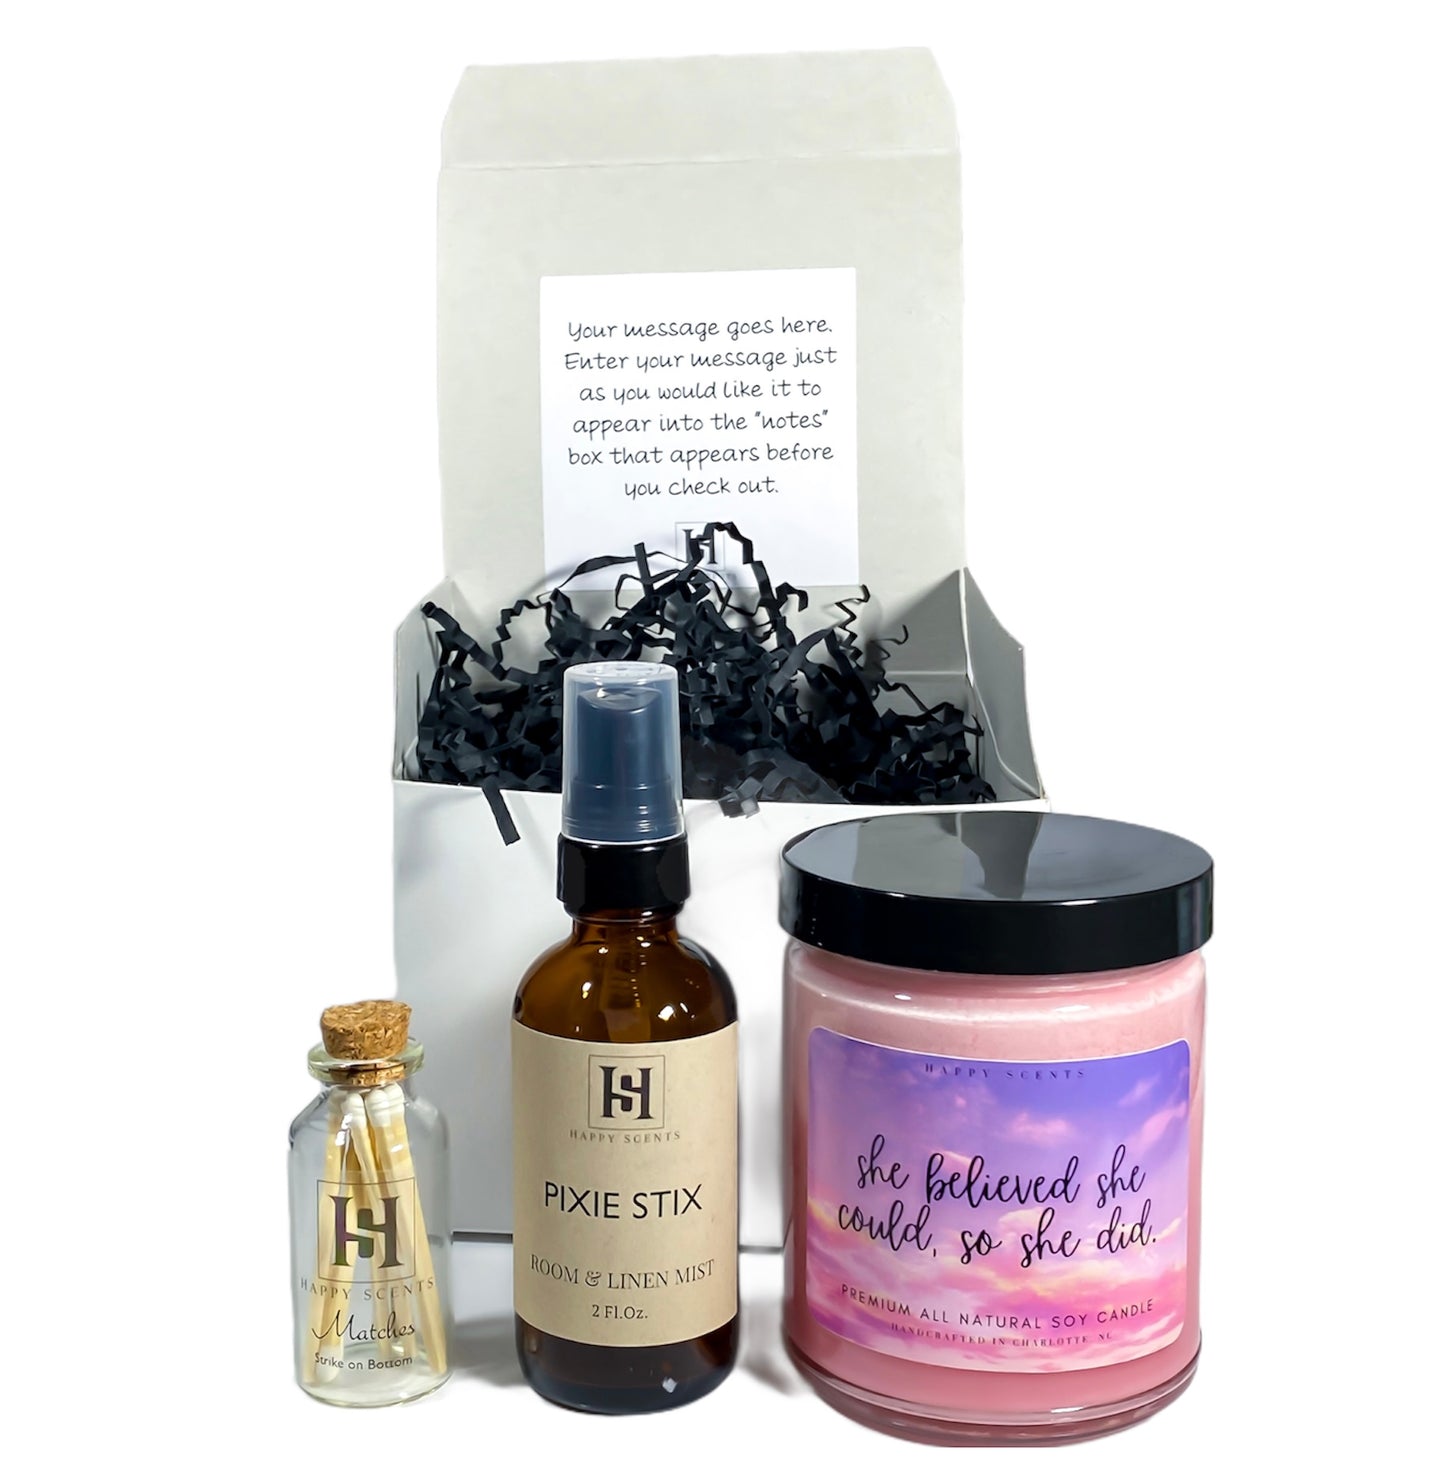 "She Believed She Could, so She Did" Gift Box